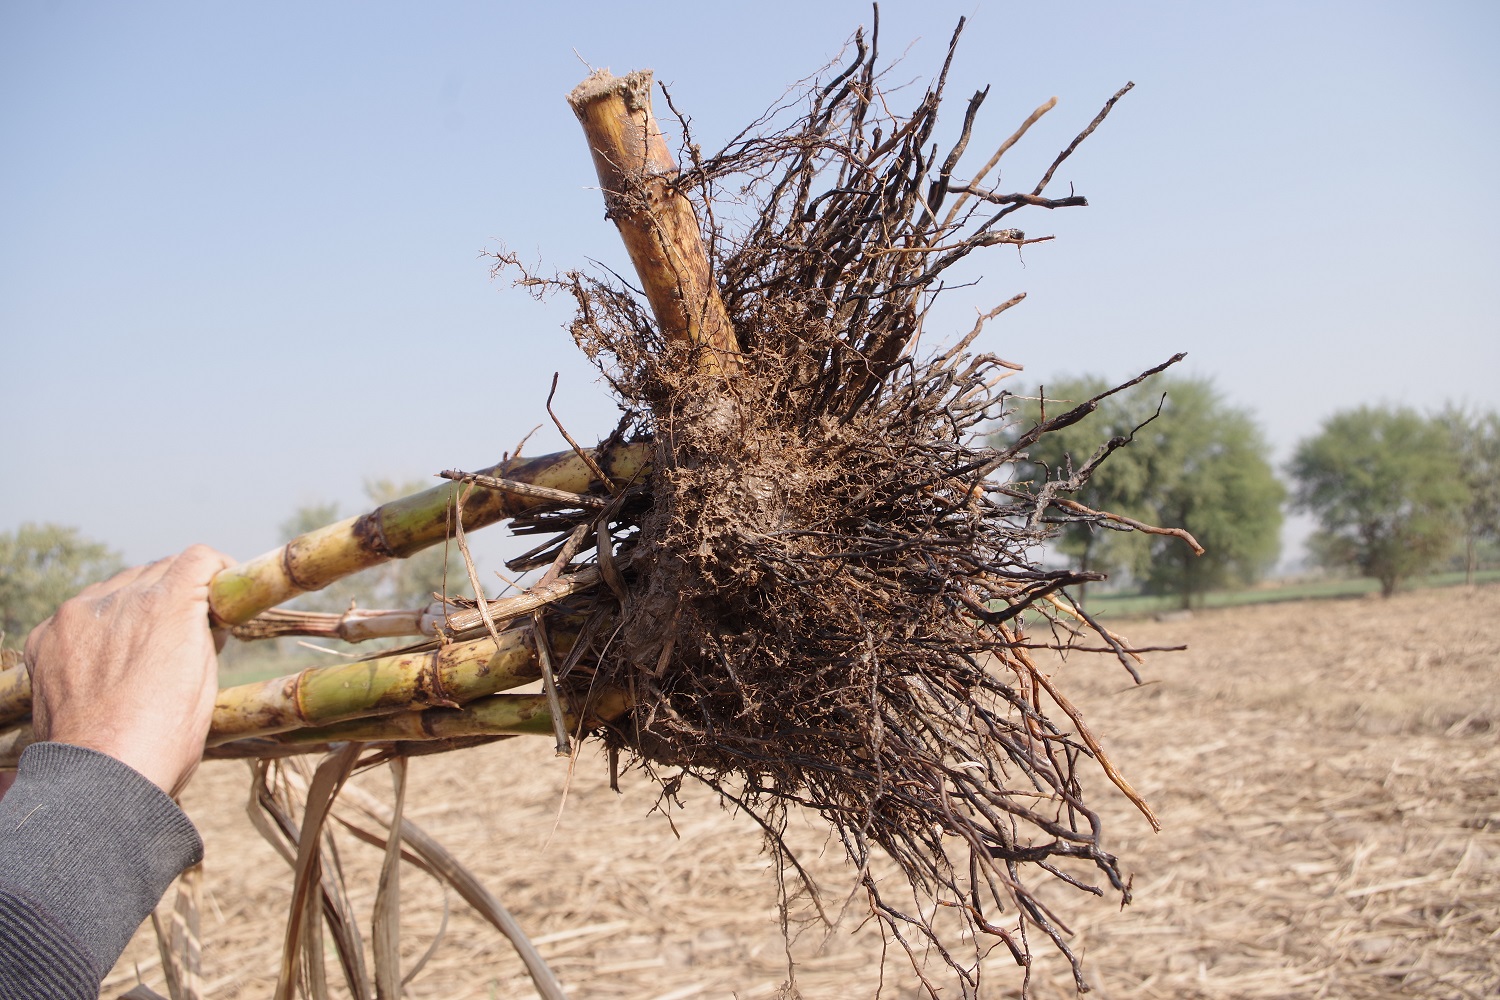 Under-developed or poor root system of Sugarcane - leads to crop lodging